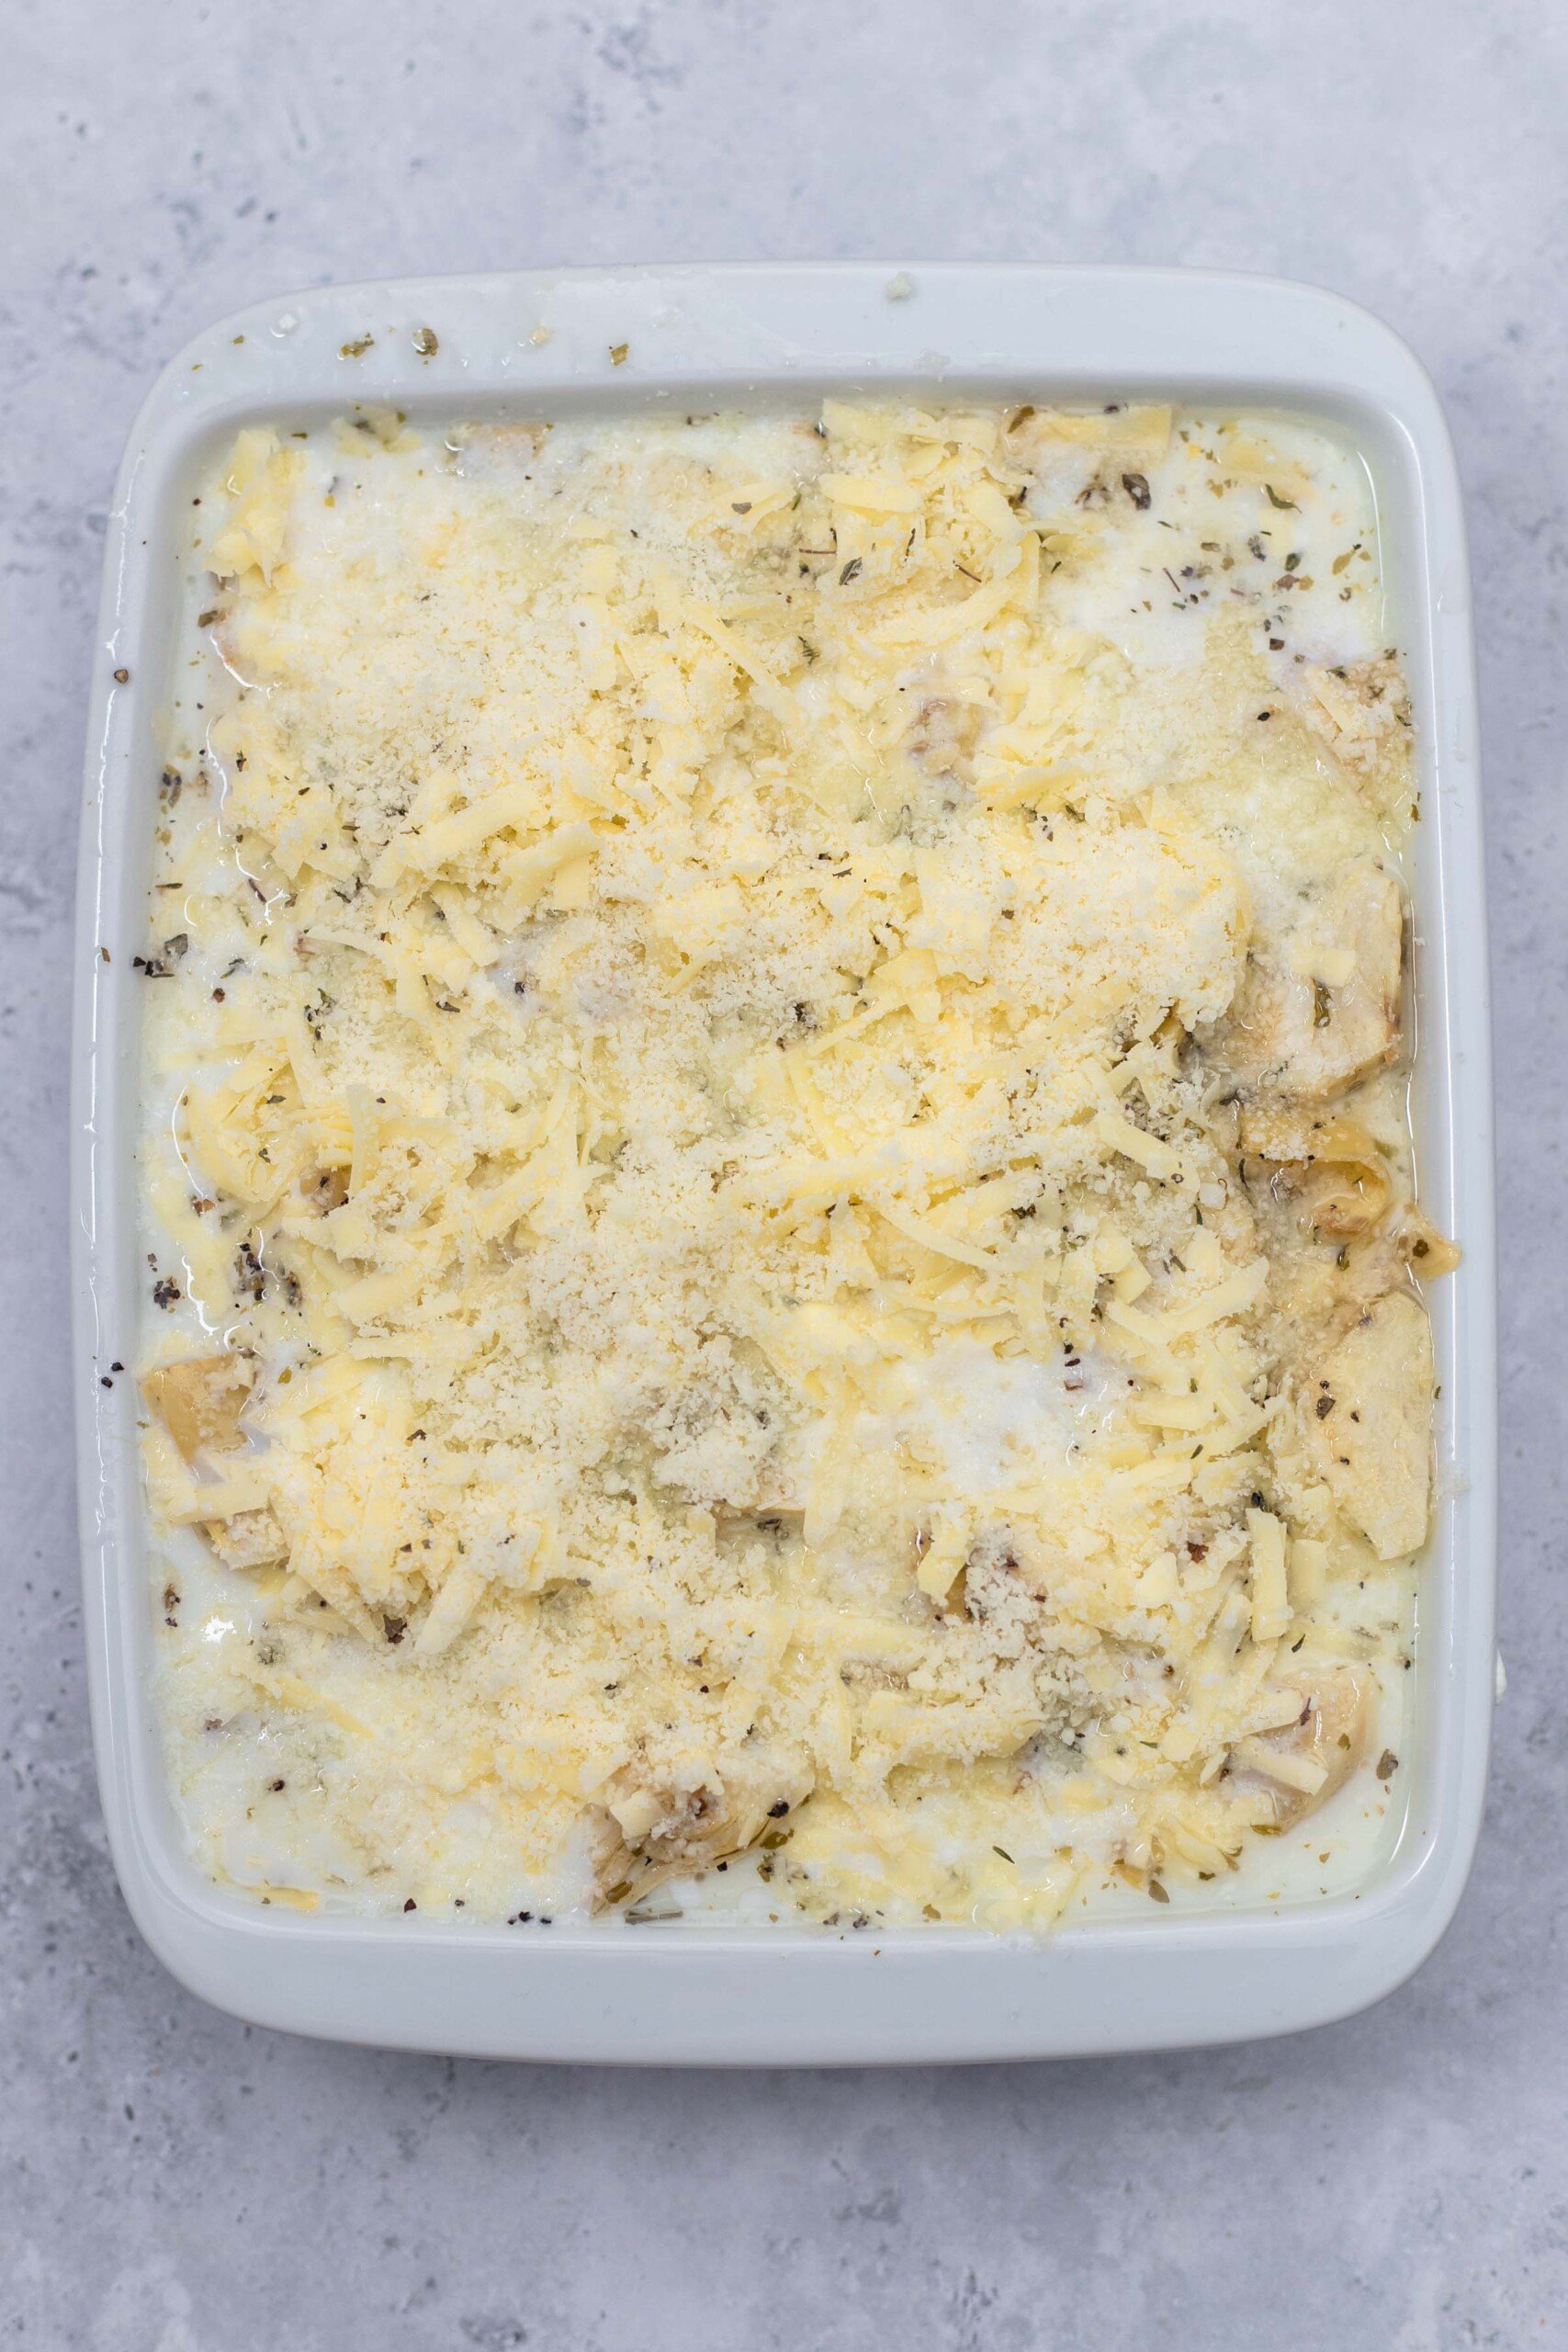 uncooked pasta bake topped with cheese